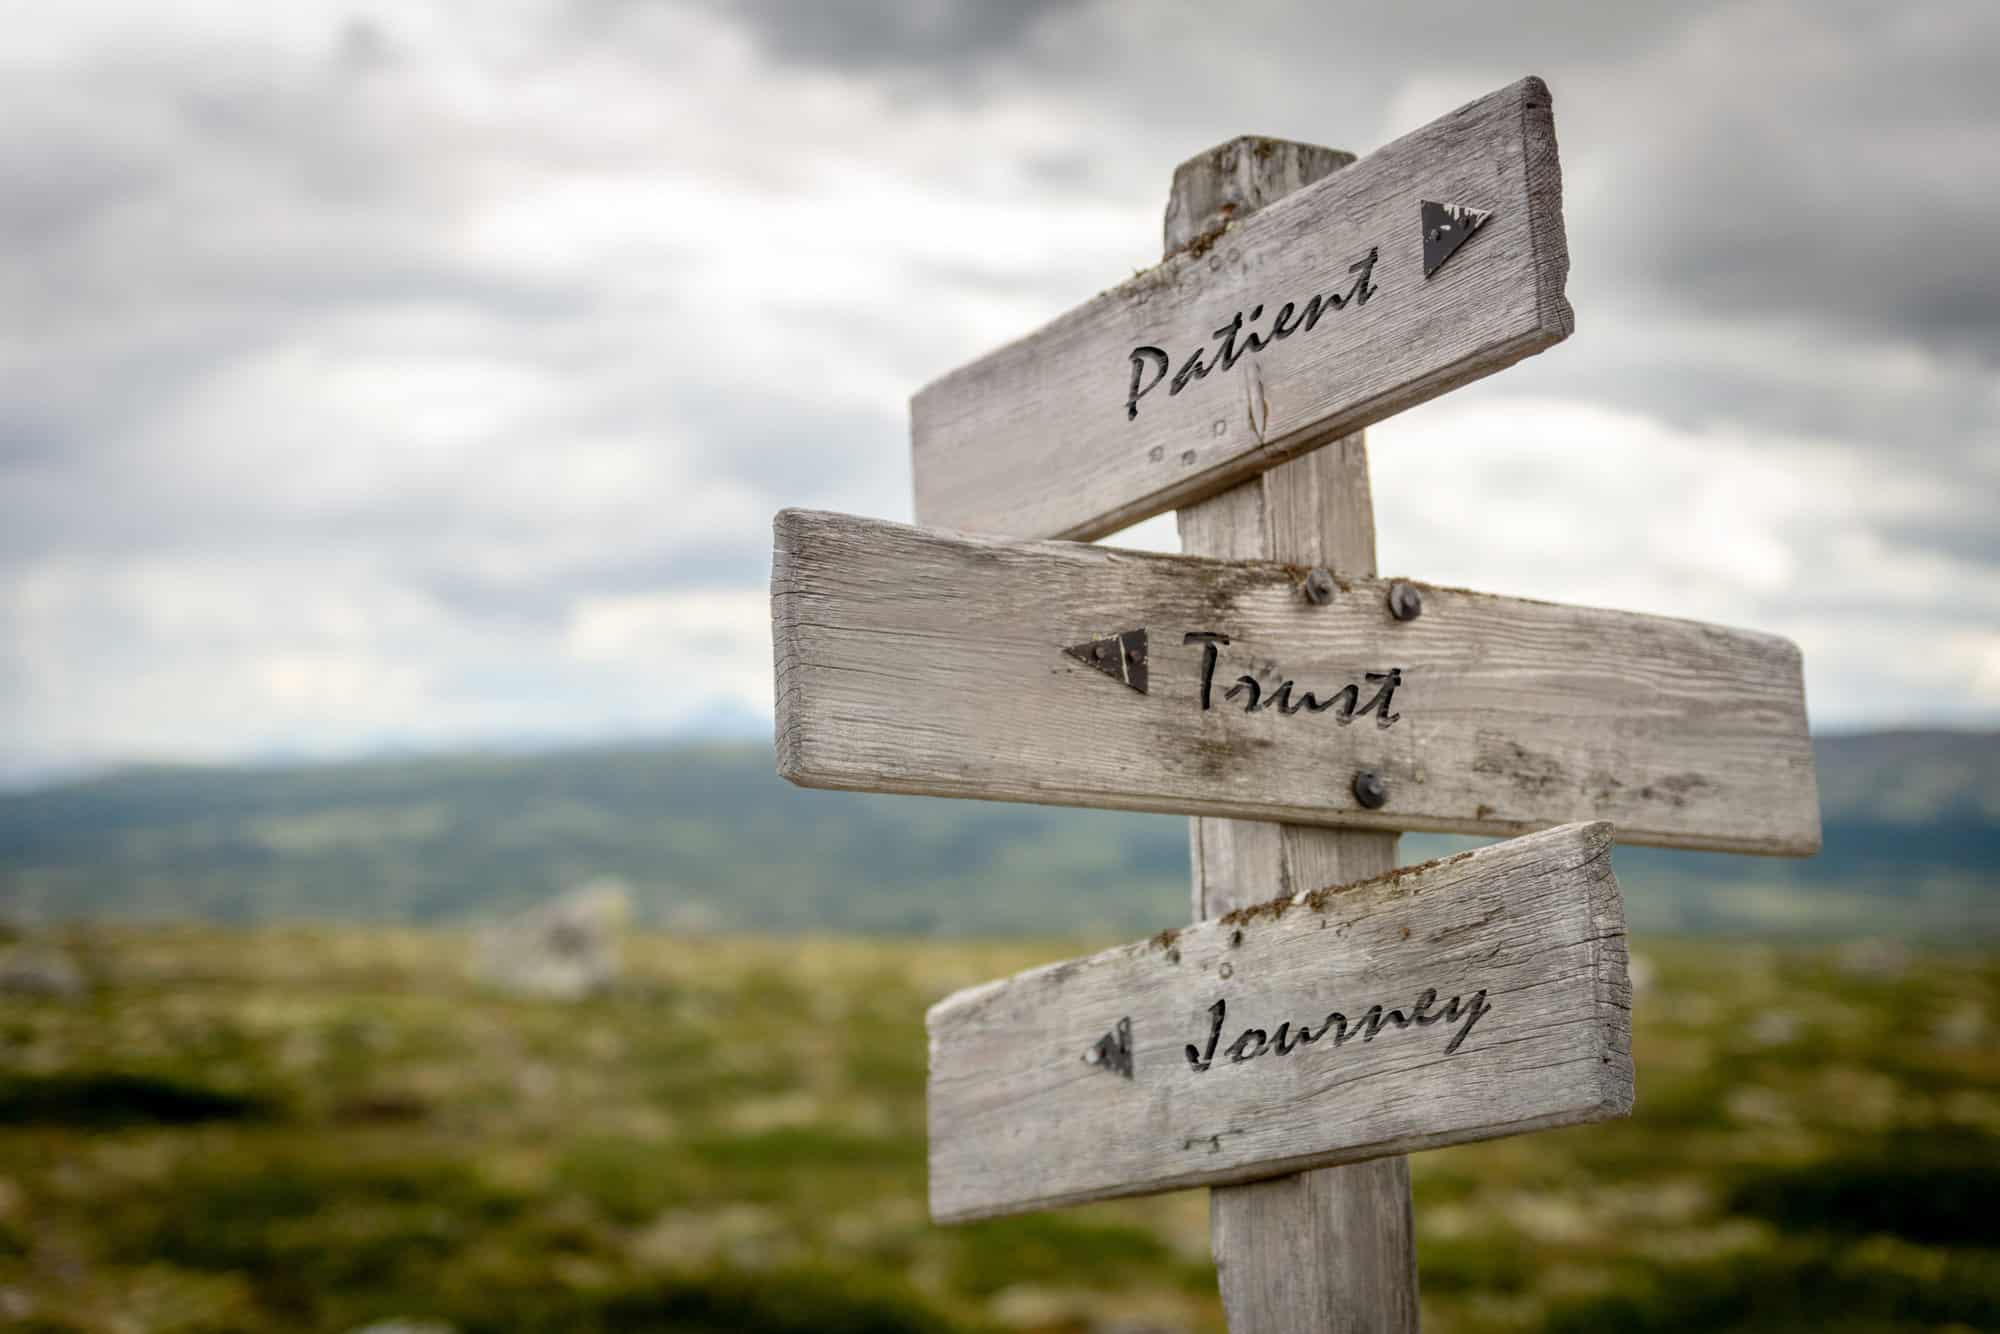 patient, trust and journey text on wooden signpost outdoors in nature.